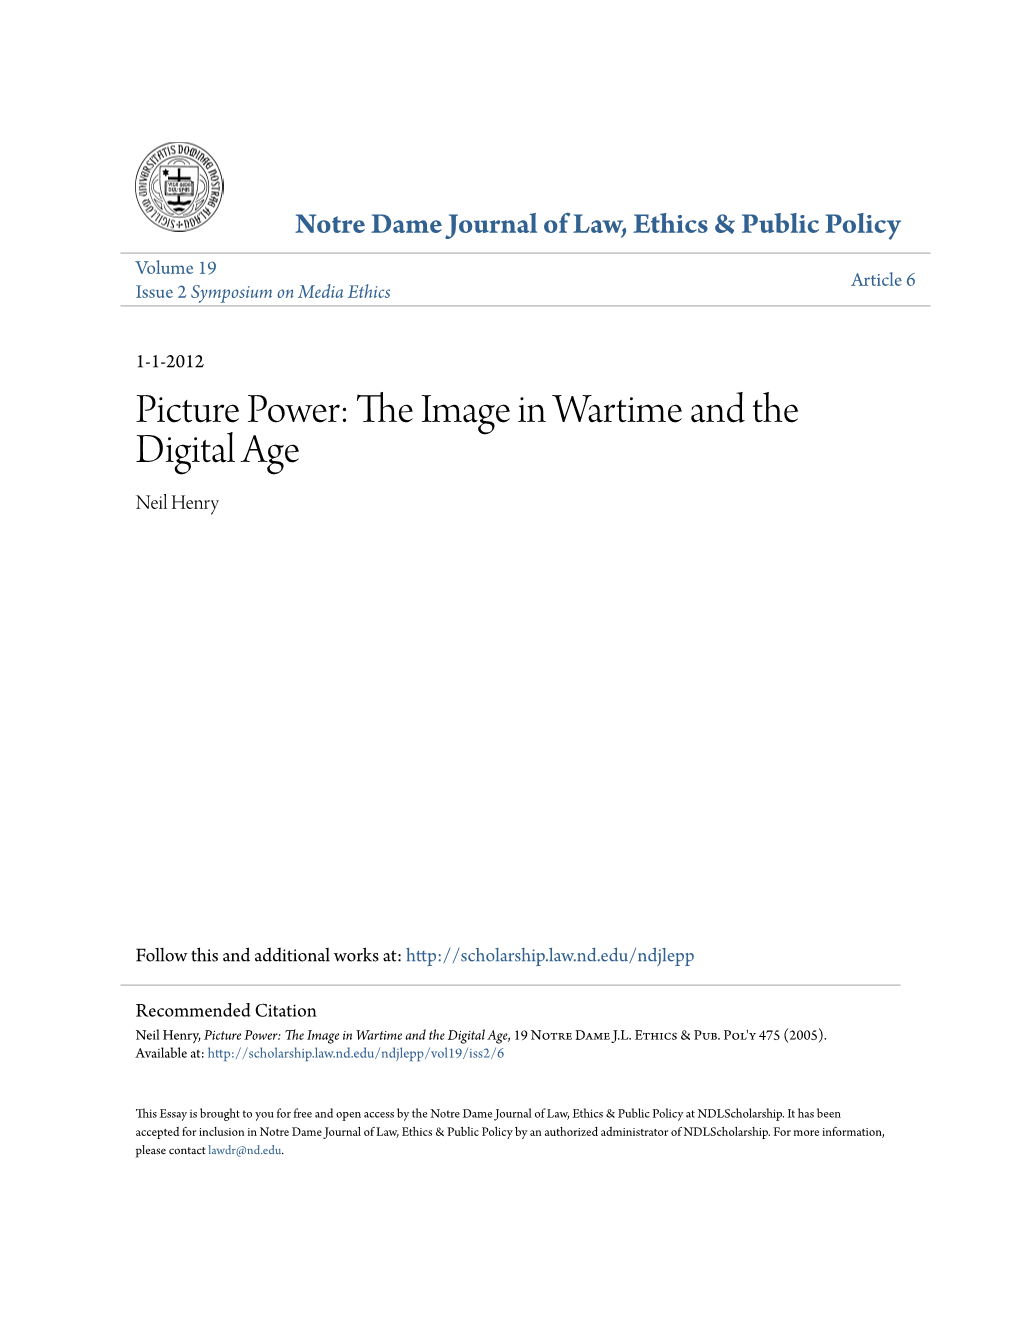 Picture Power: the Mi Age in Wartime and the Digital Age Neil Henry